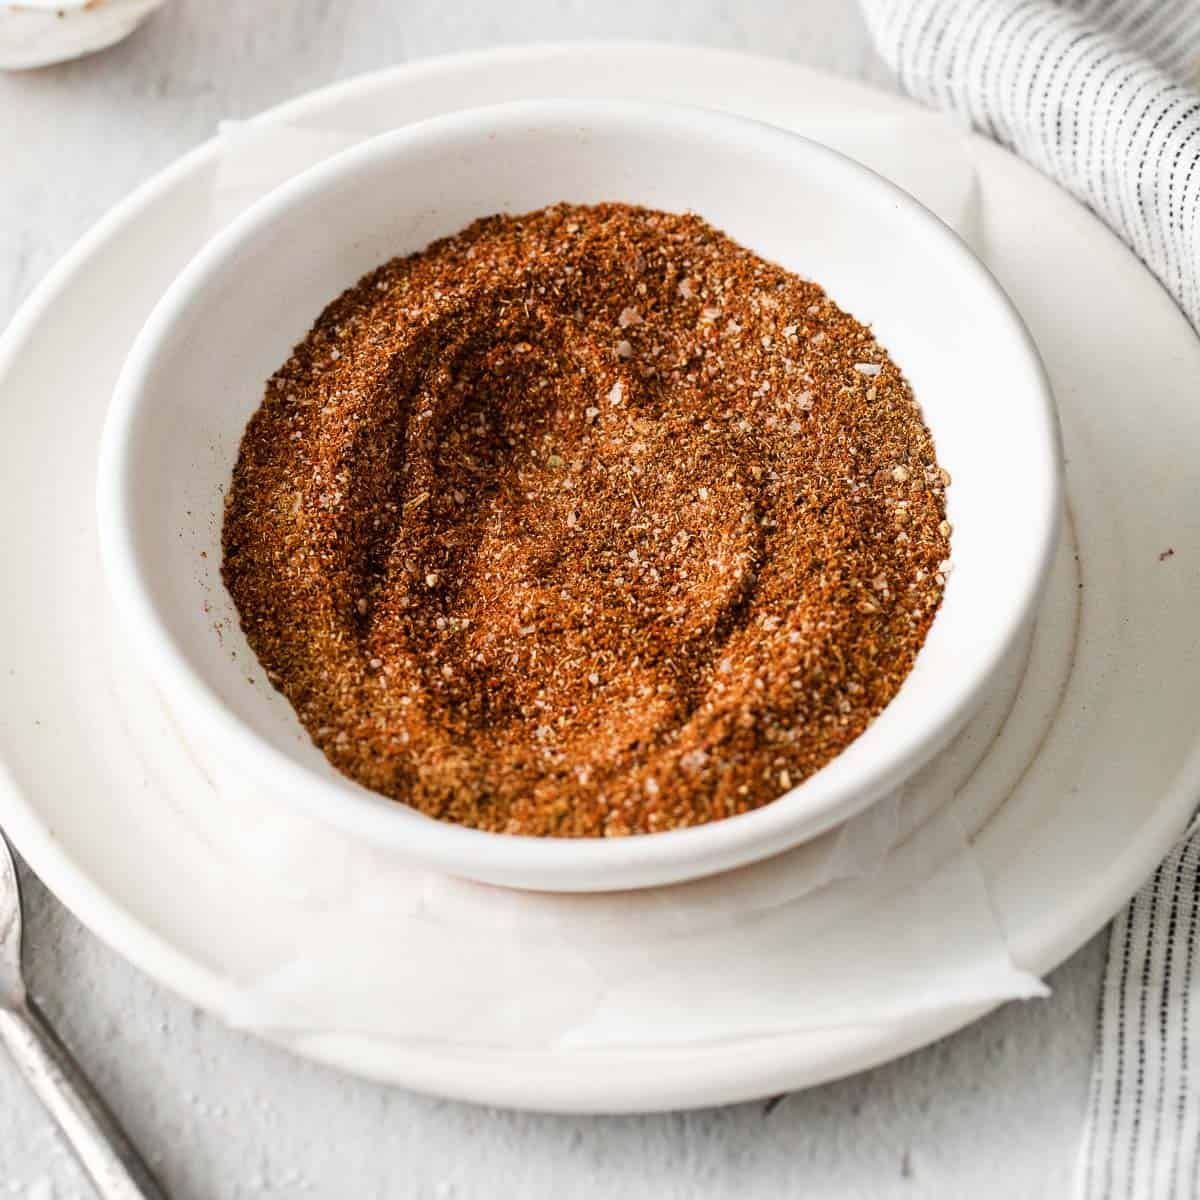 Lawry's Taco Spices and Seasonings Mix Copycat Recipe